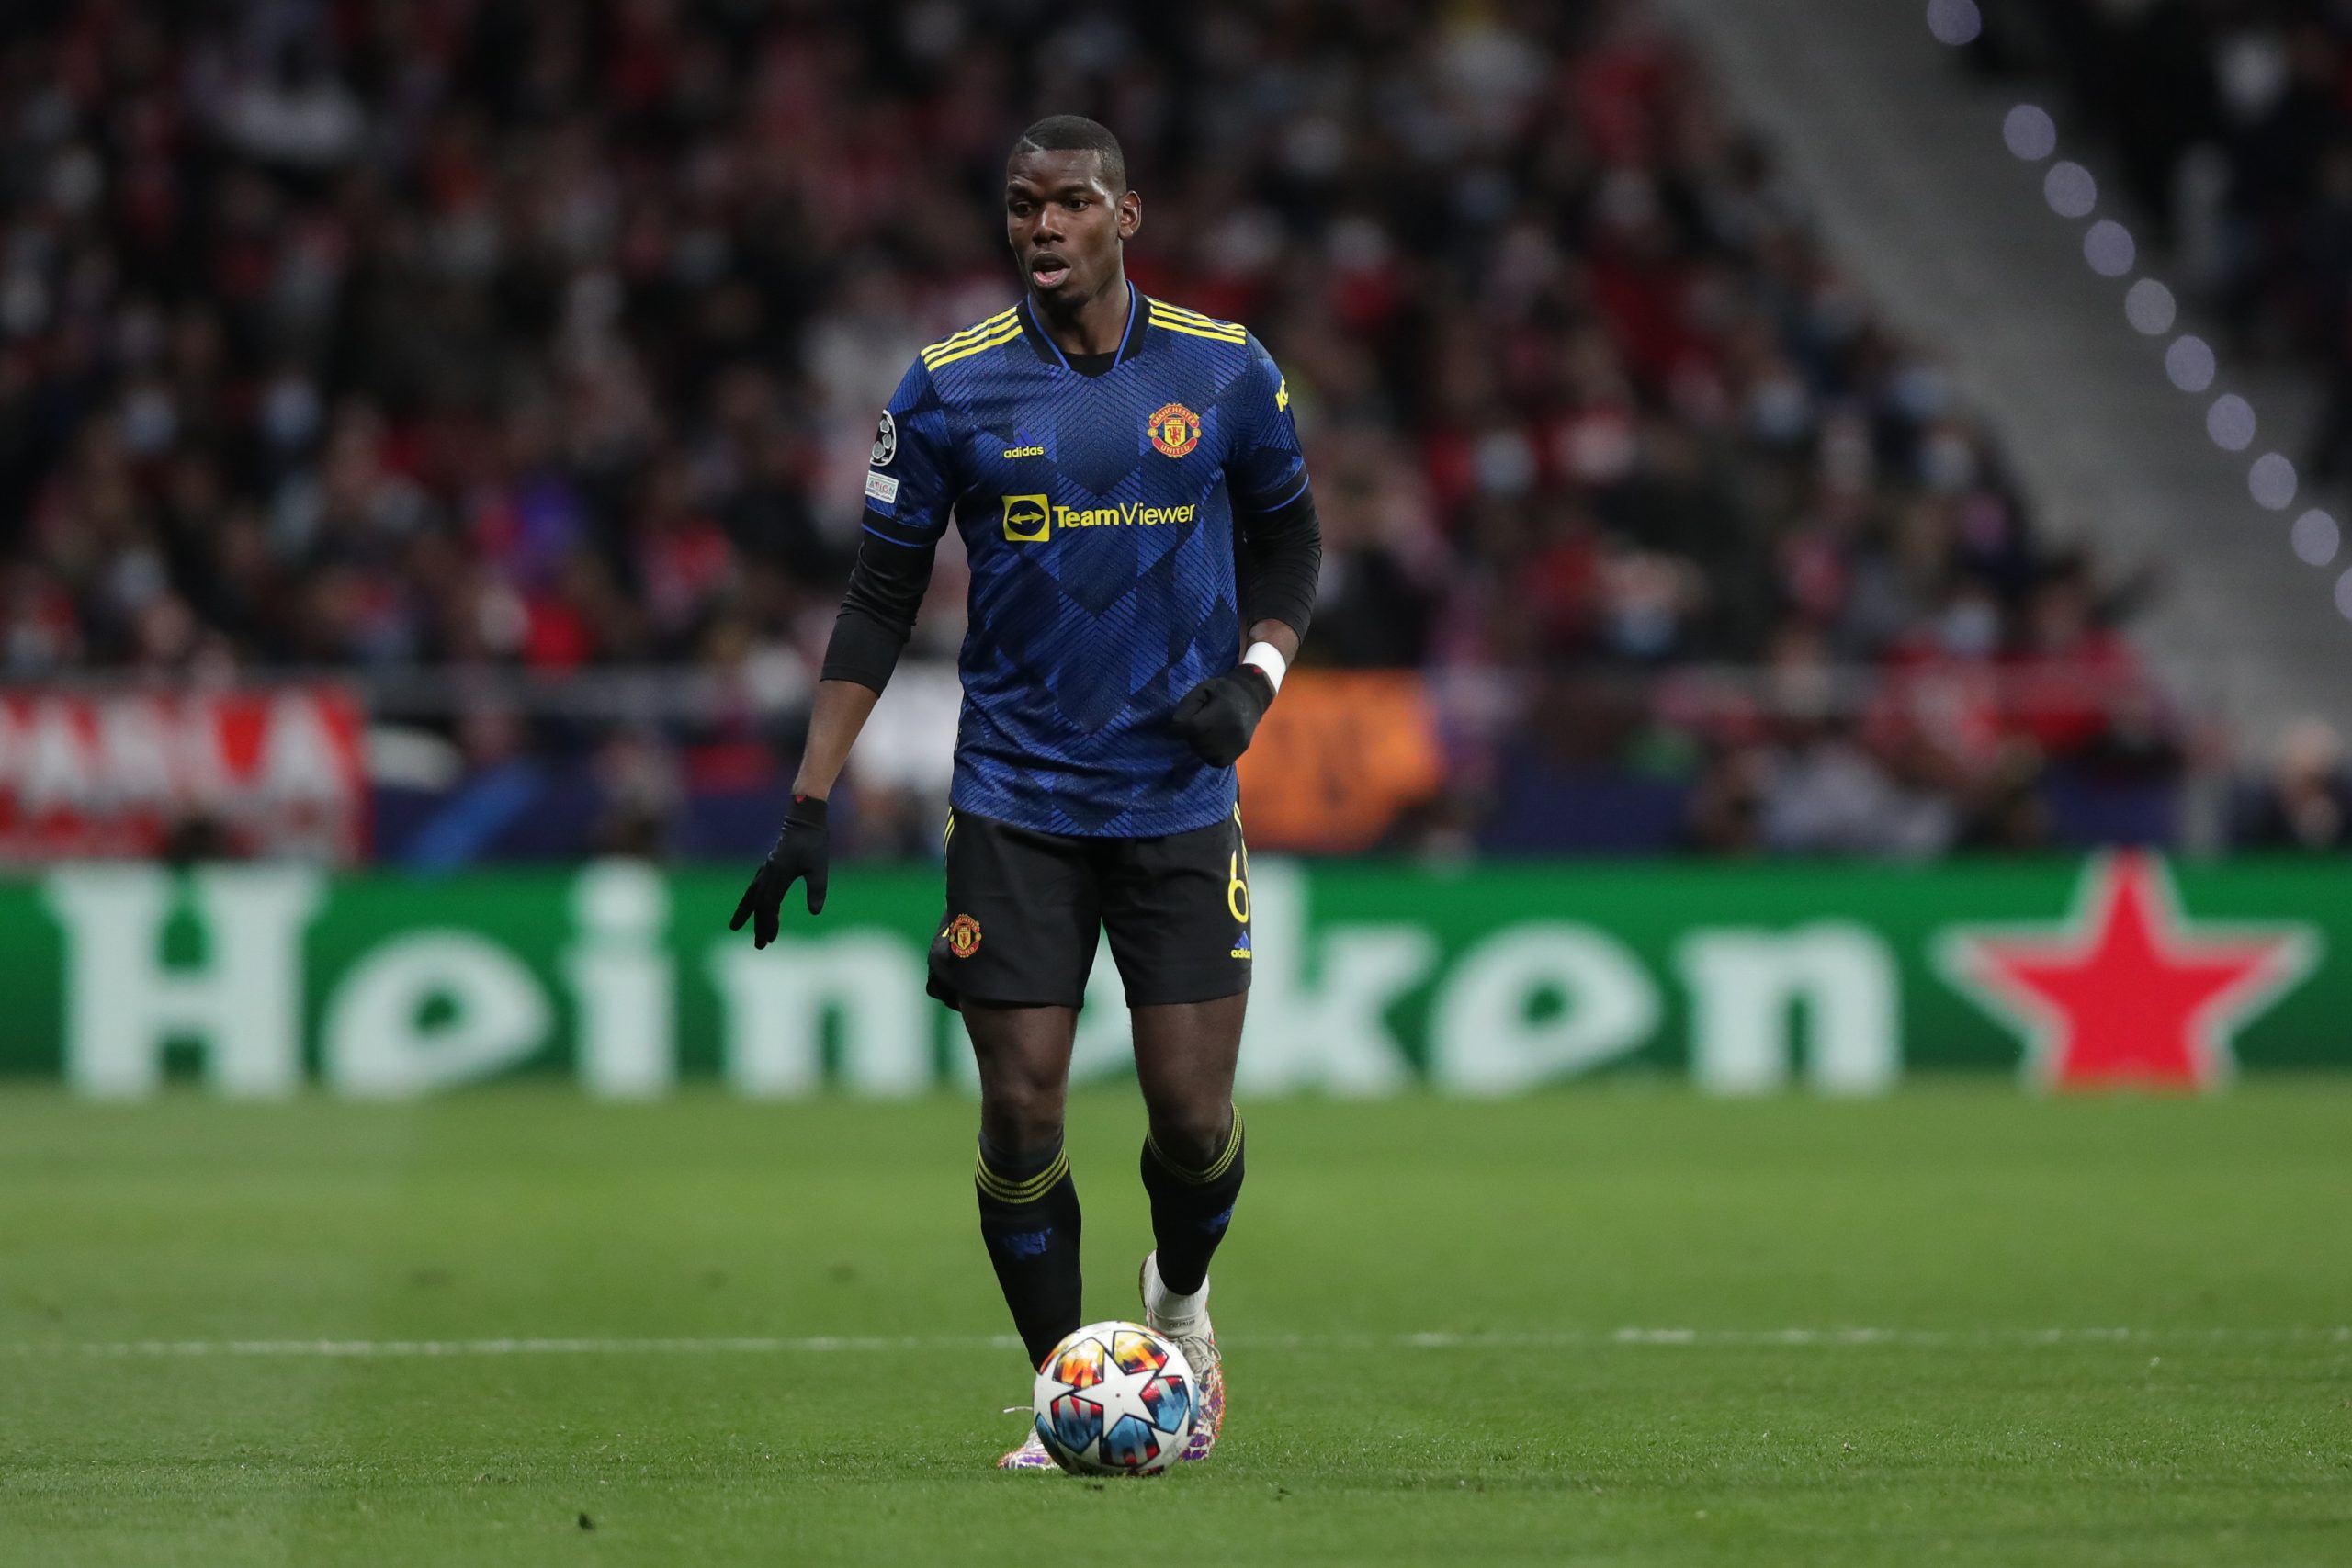 Paul Pogba is still in thoughts about his future. (Photo by Gonzalo Arroyo Moreno/Getty Images)